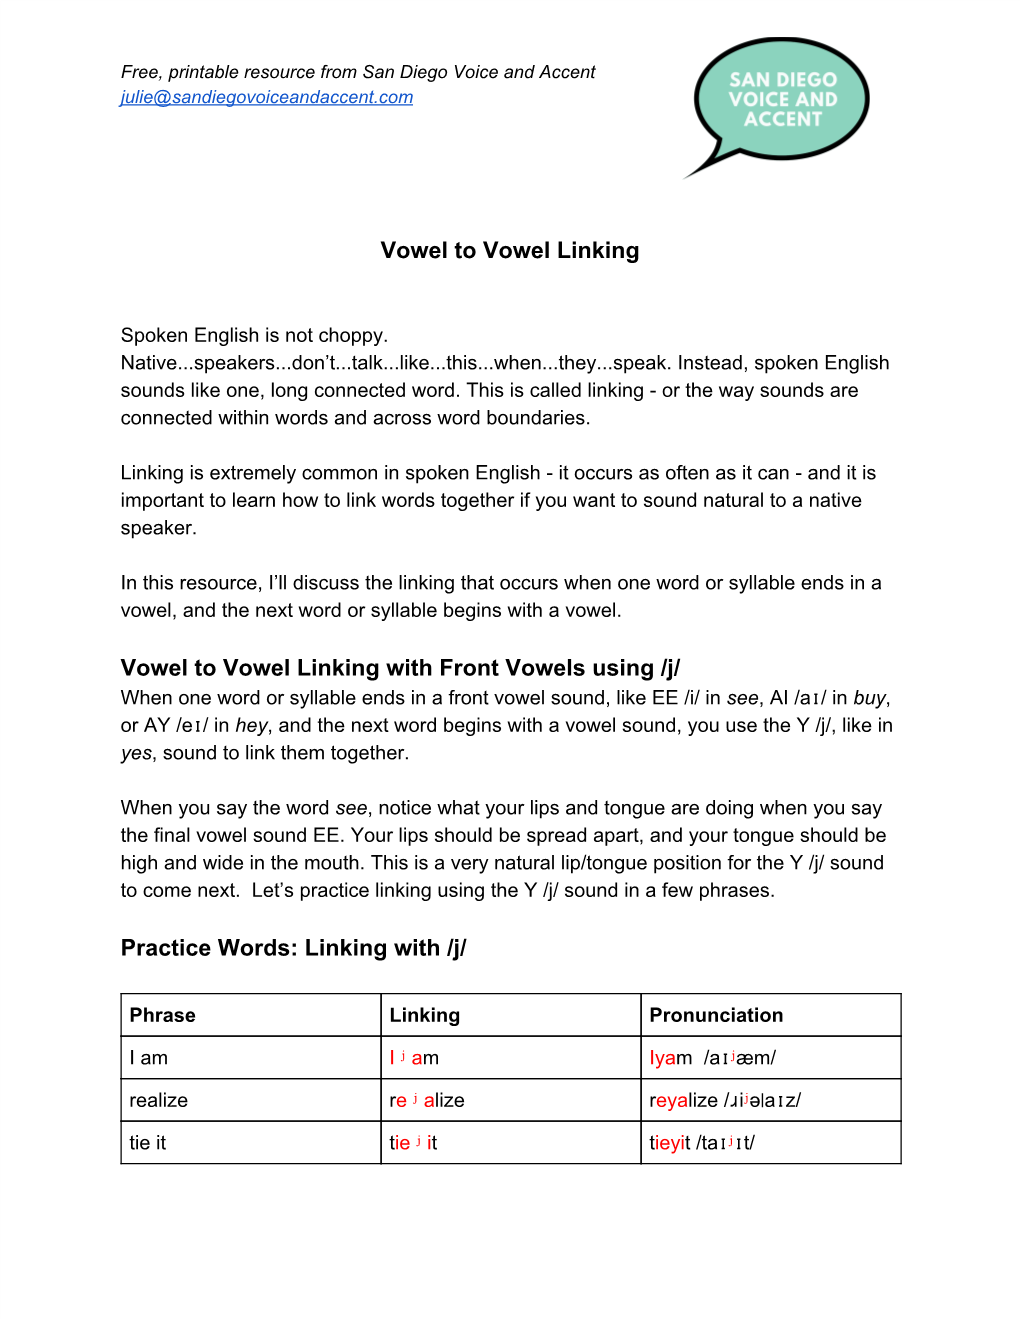 Practice Words: Linking with /J